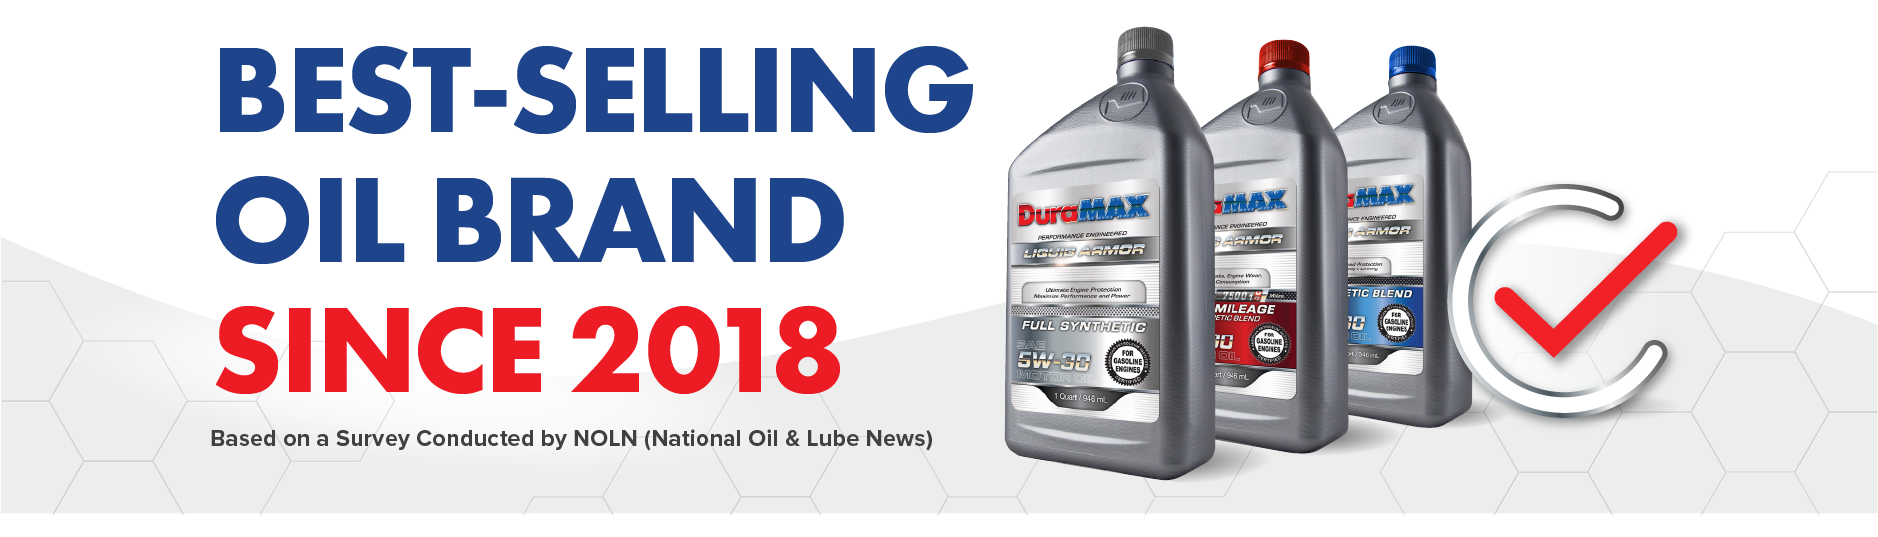 DuraMAX Best-Selling Oil Brand Since 2018